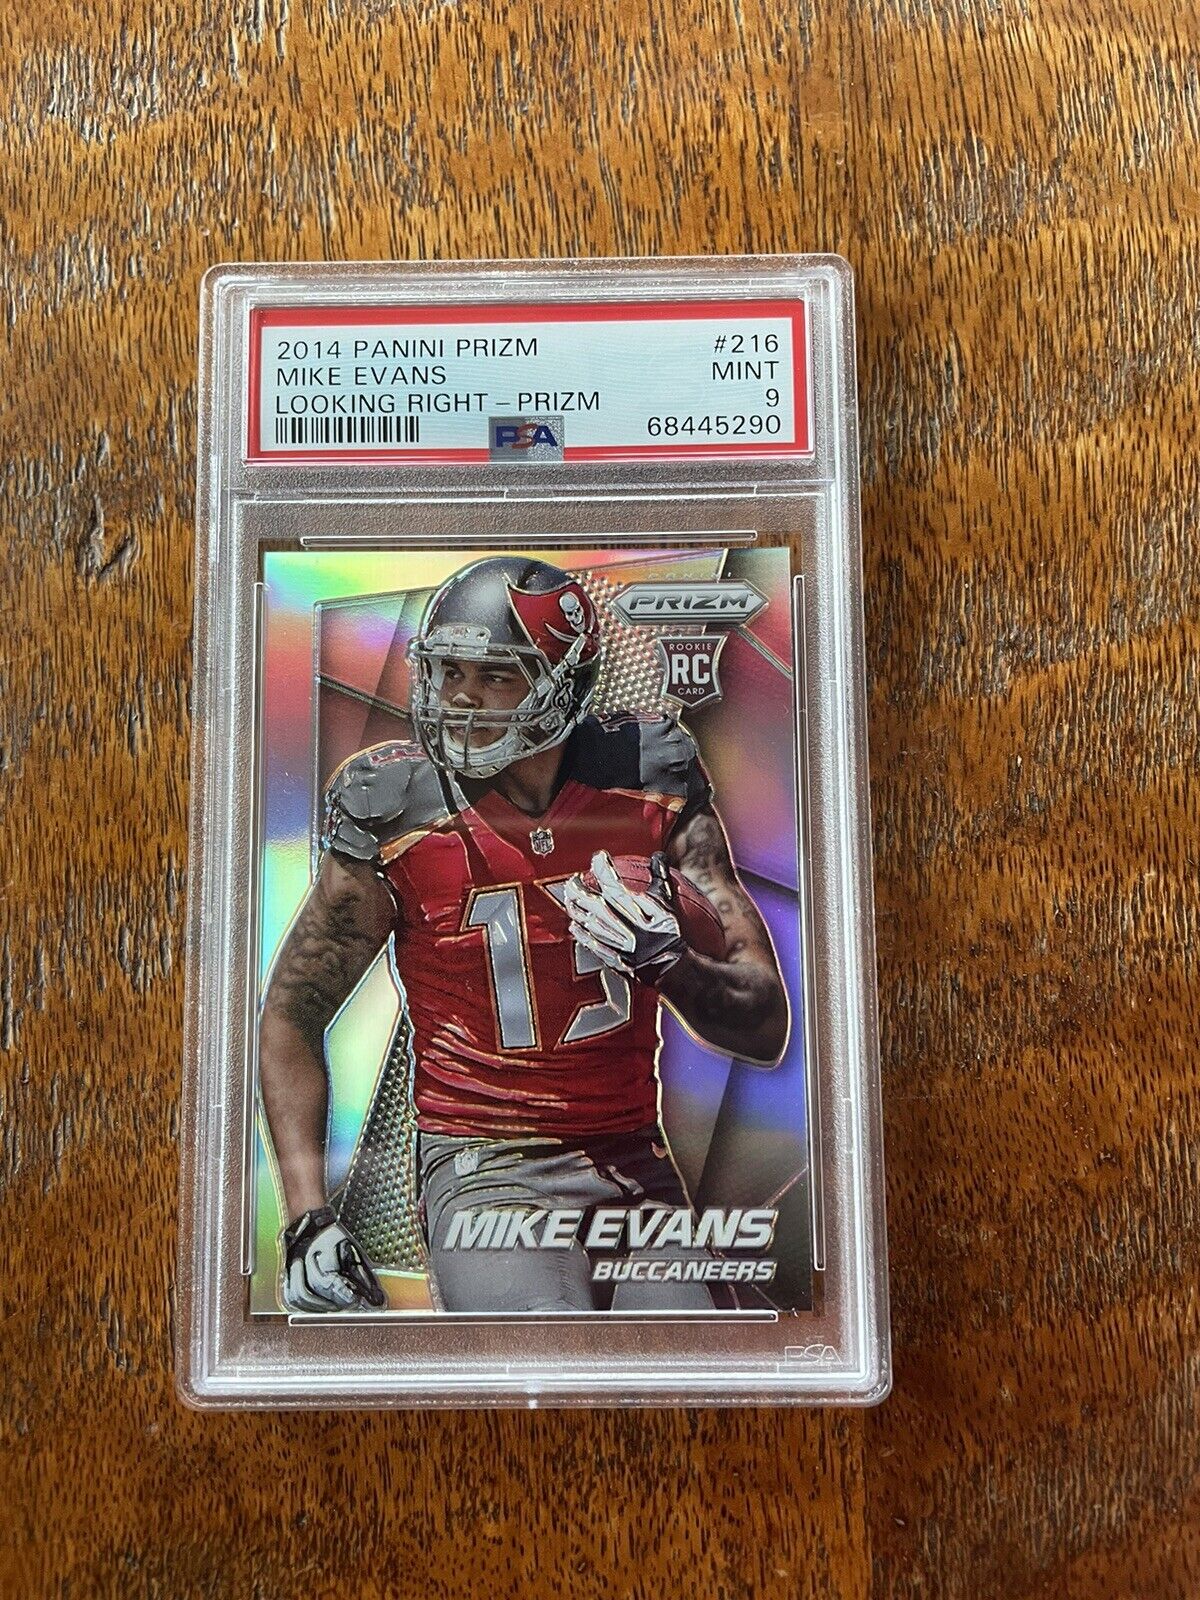 2014 PANINI PRIZM MIKE EVANS, #216, SILVER LOOKING RIGHT PSA MINT 9 (5290)